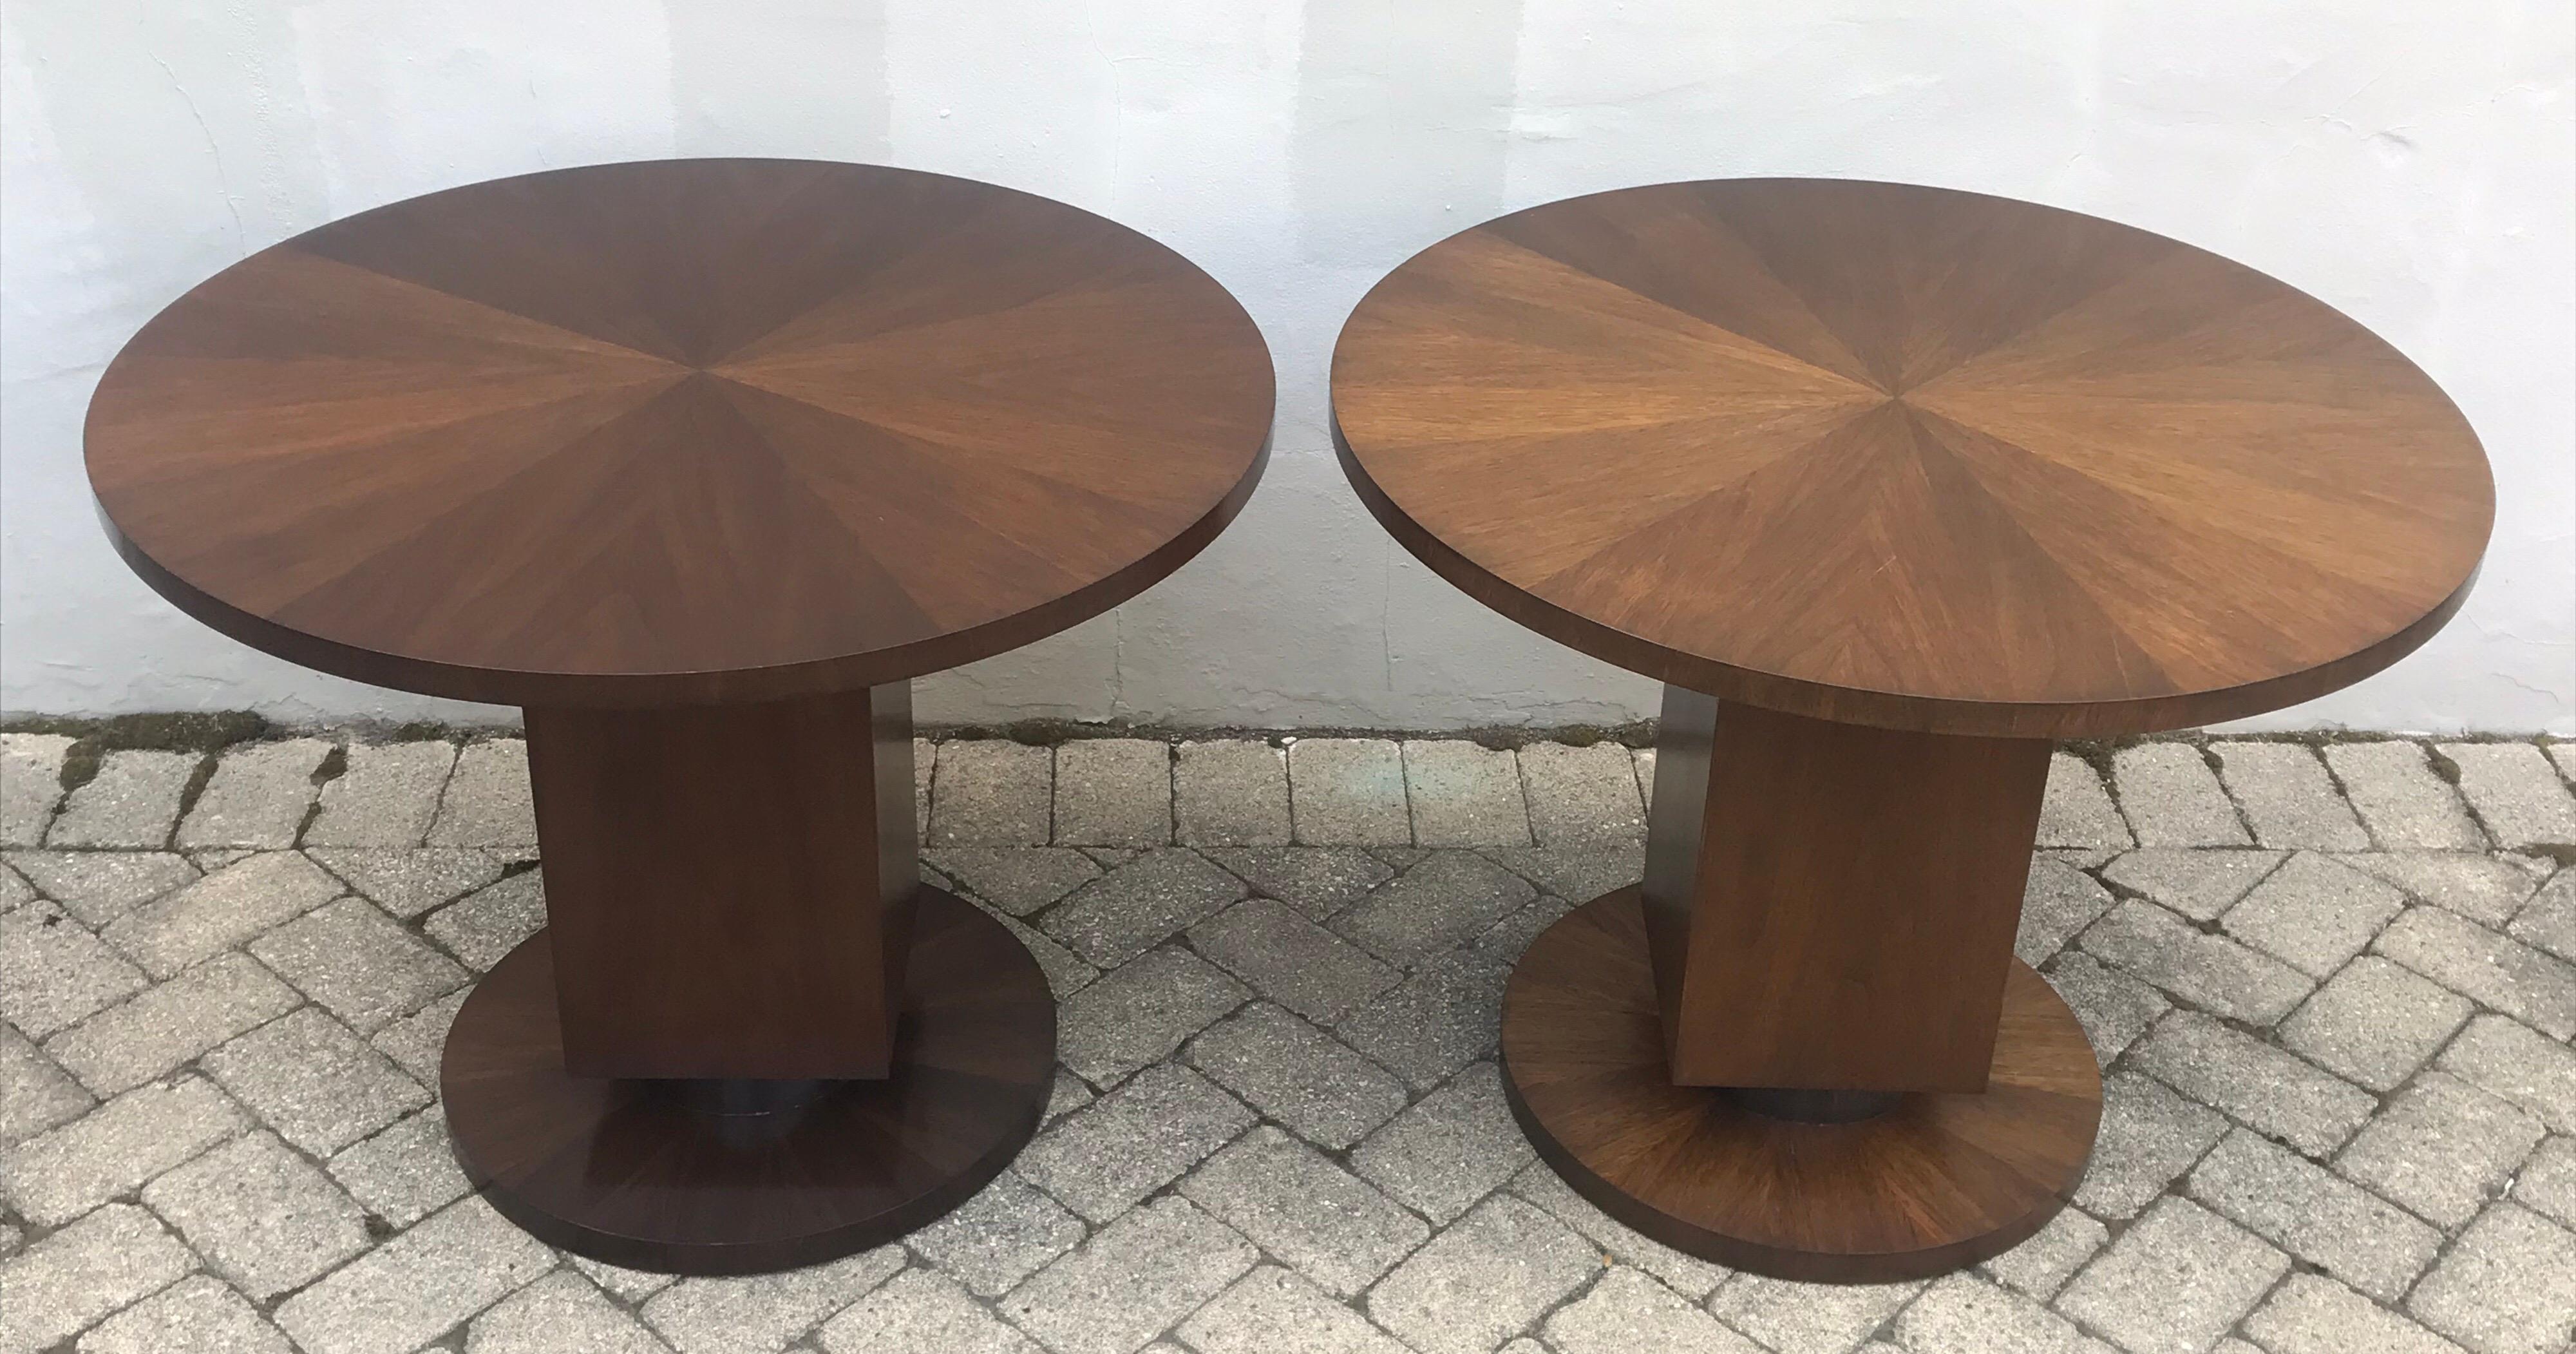 Beautiful pair of Art Deco style round side tables in walnut, custom one of a kind, late 20th century.